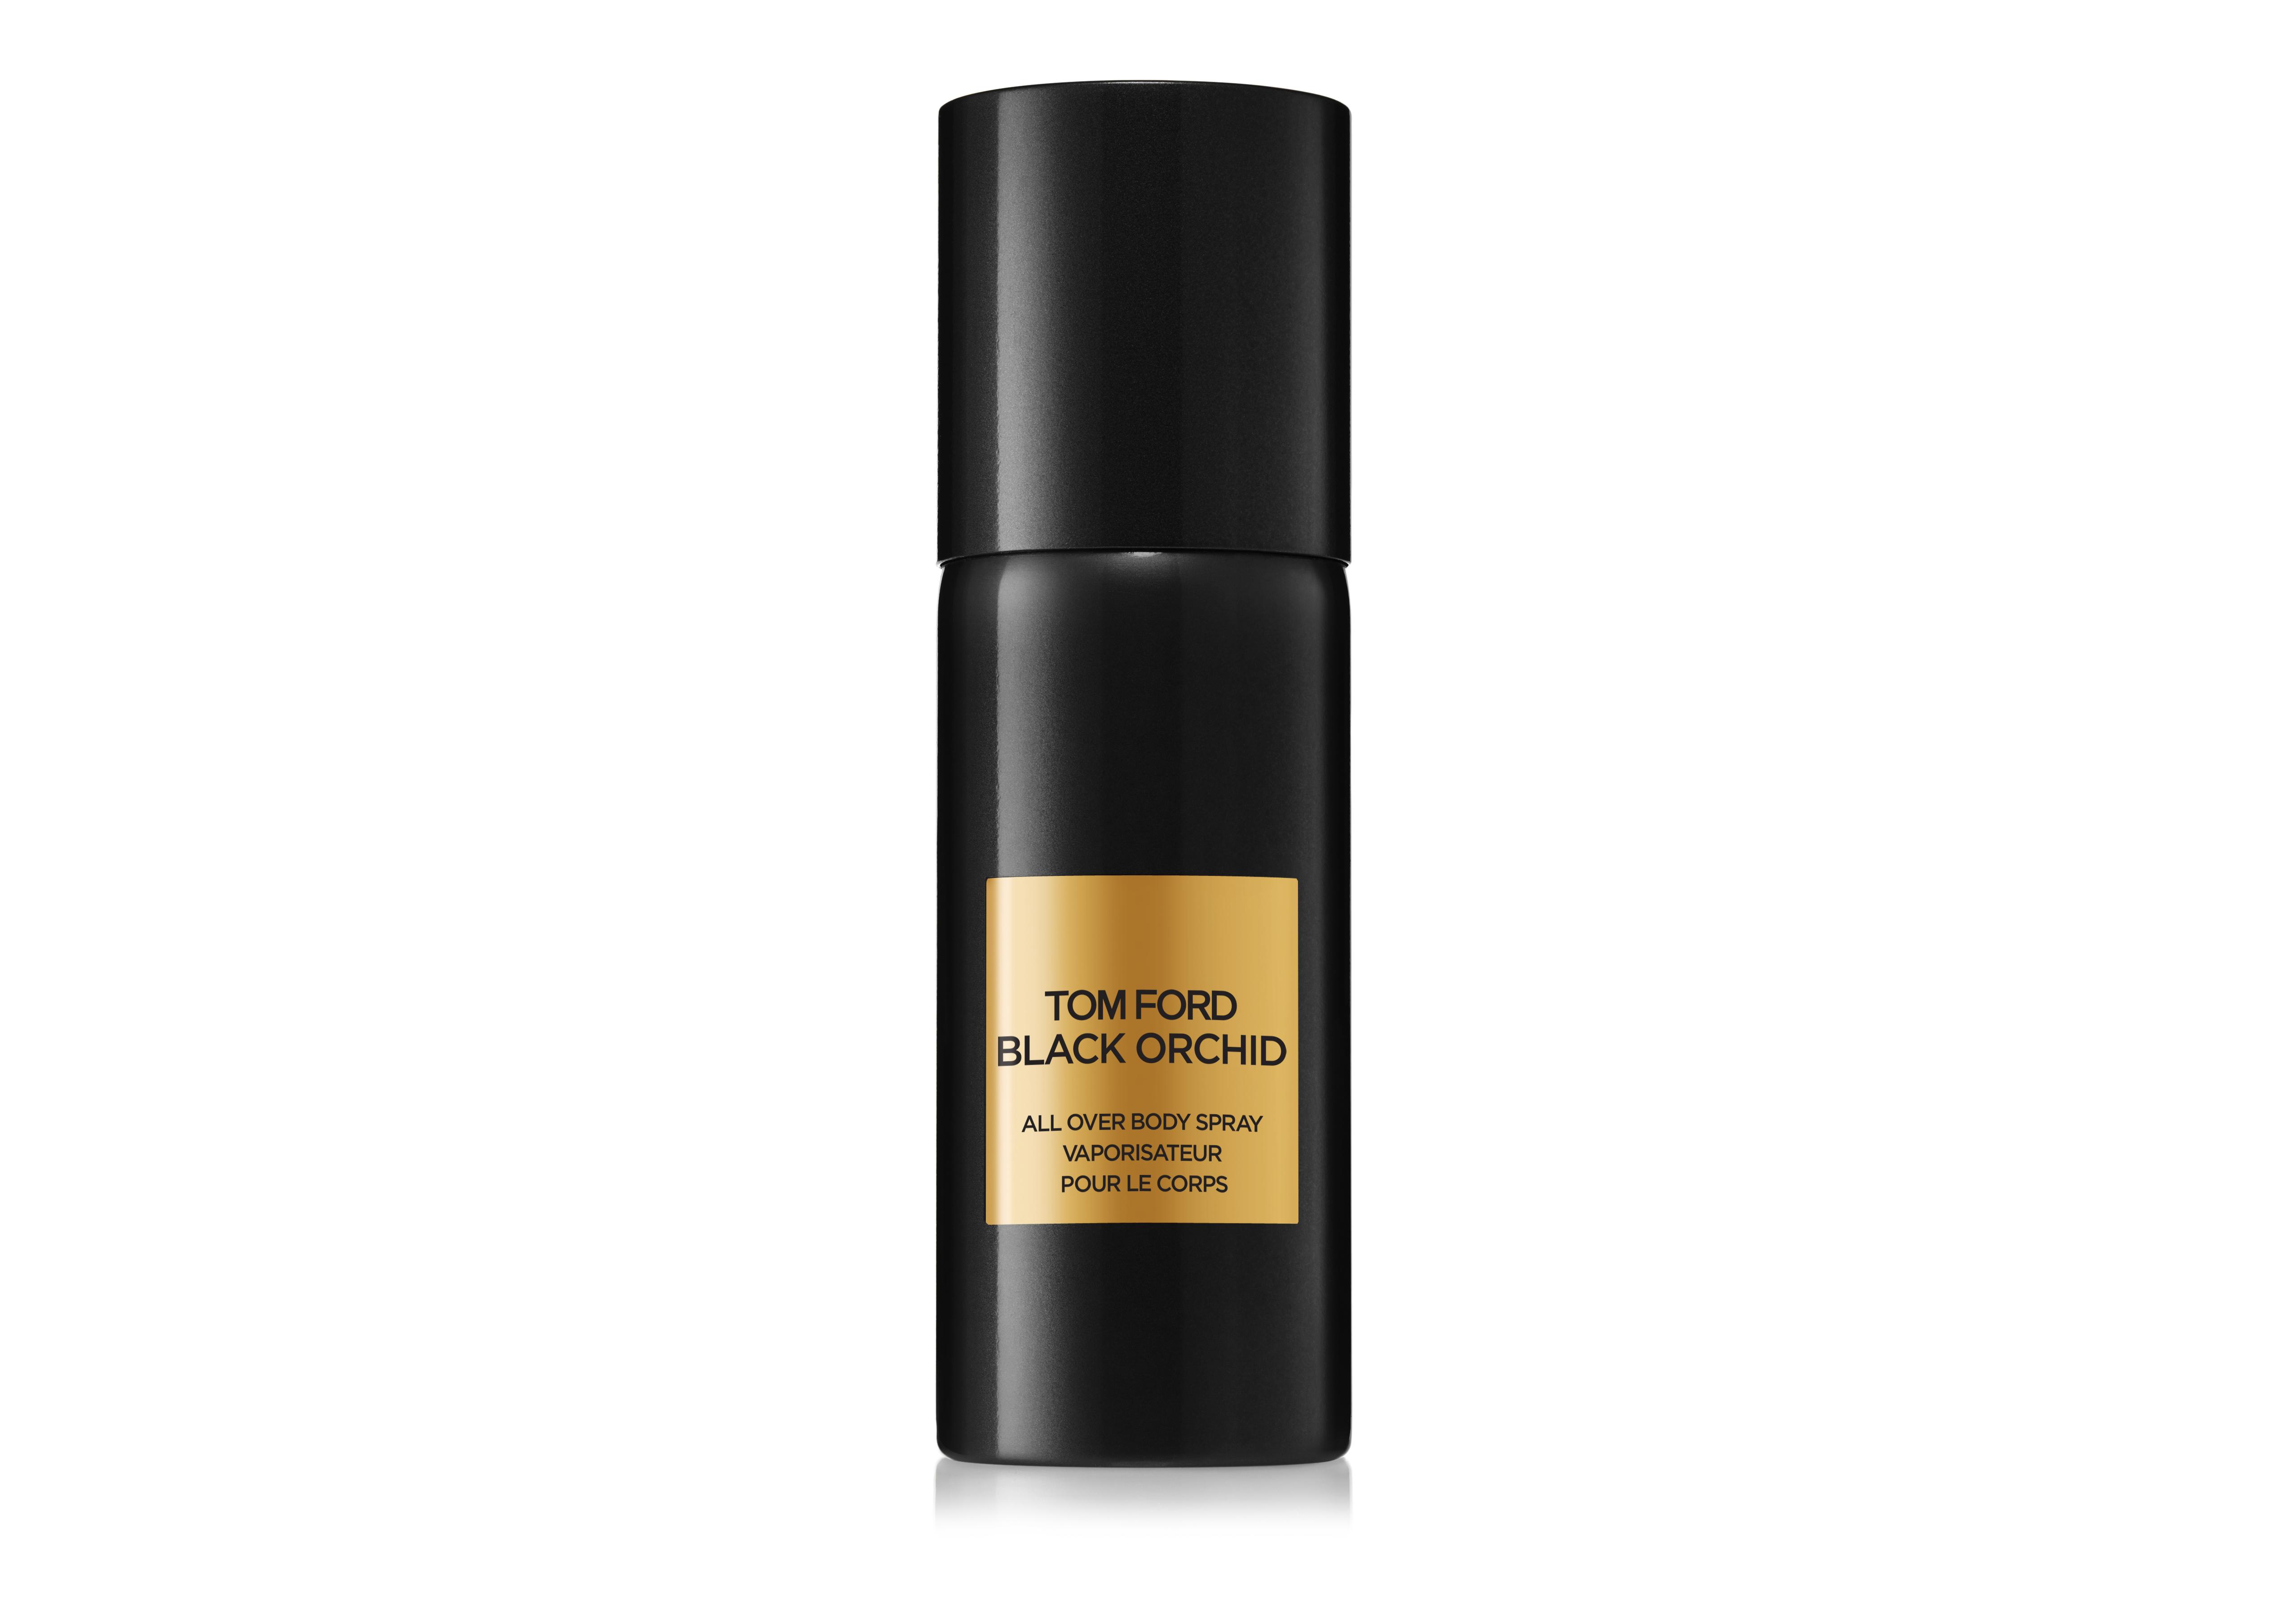 Tom Ford BLACK ORCHID ALL OVER BODY SPRAY 